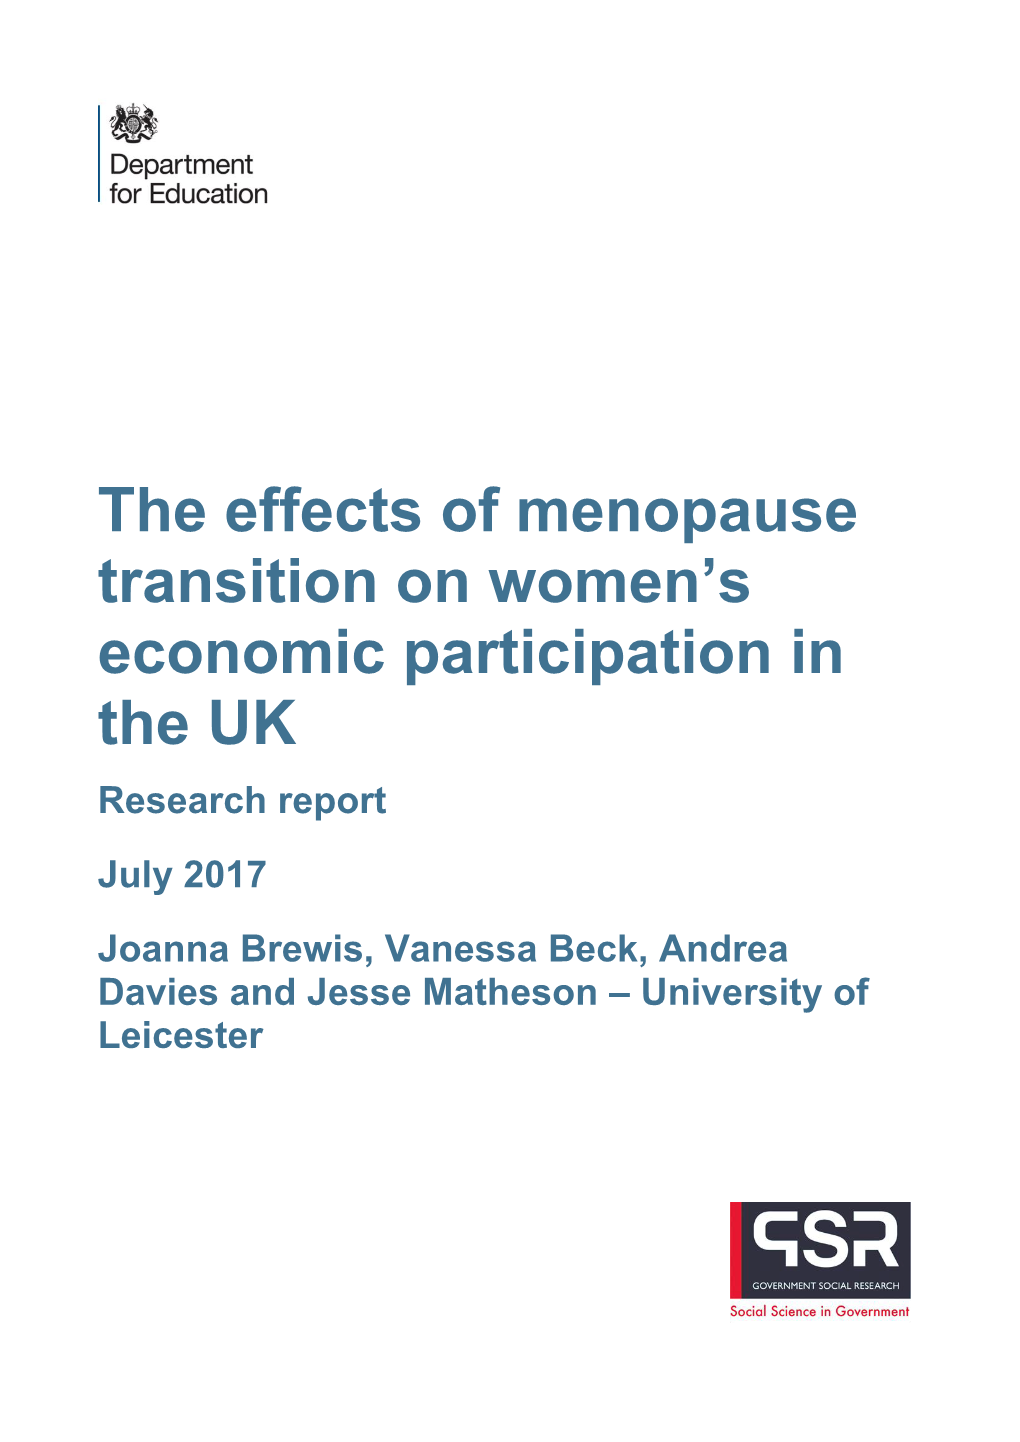 University of Leicester Research Workplace Menopause Study